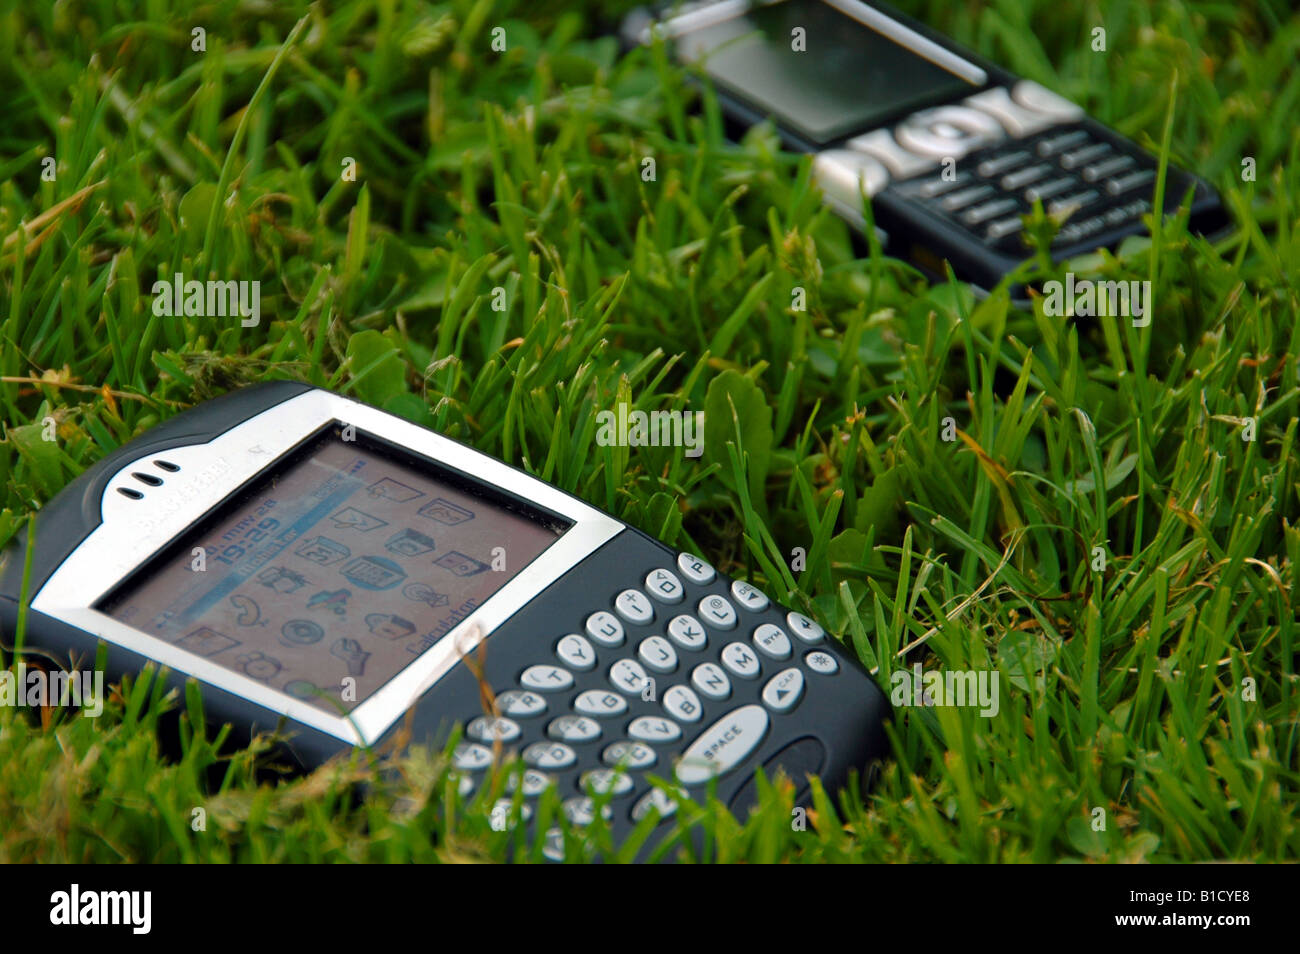 Mobile phone and blackberry lying in the grass Stock Photo